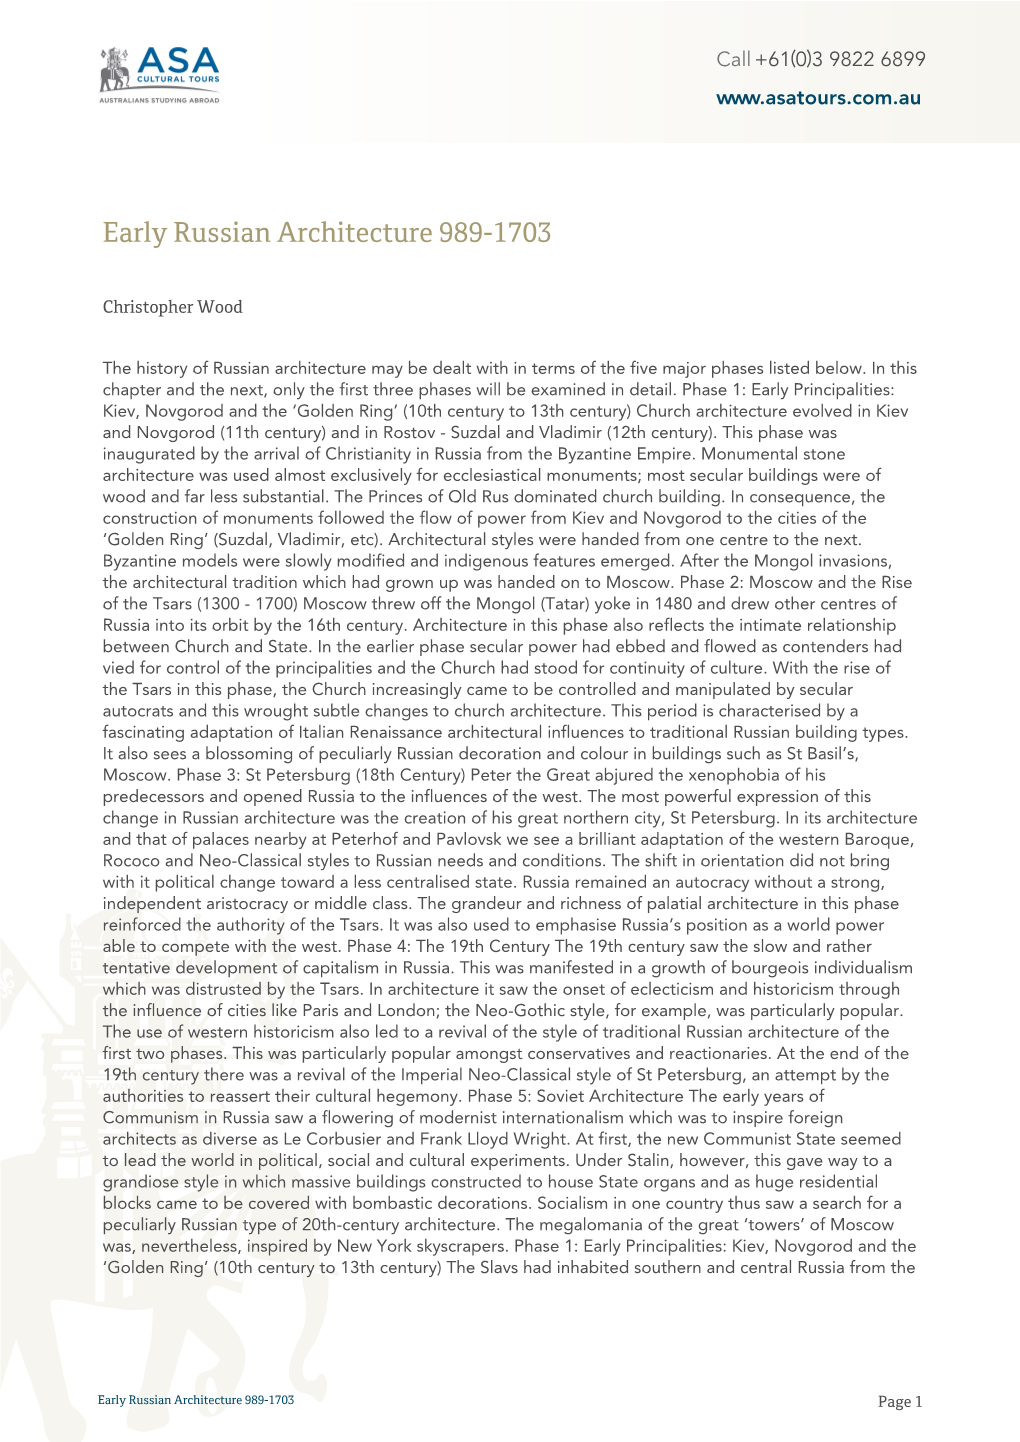 Early Russian Architecture 989-1703